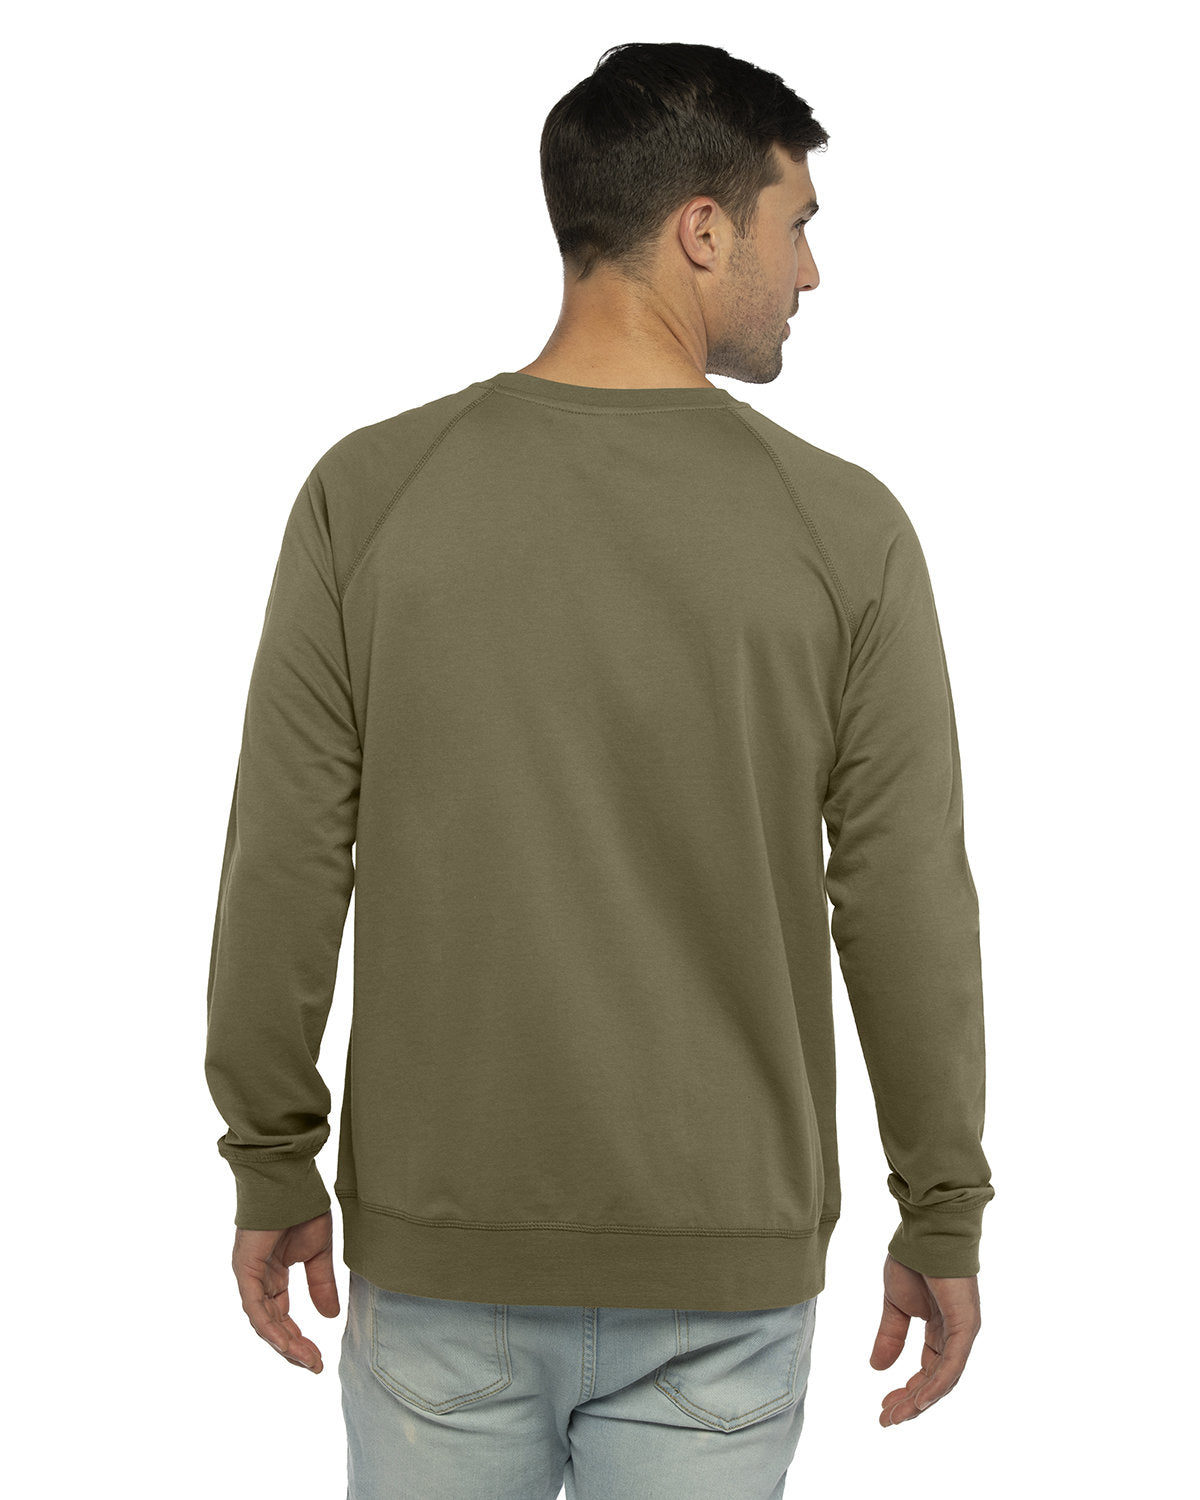 N9000-Next Level Apparel-MILITARY GREEN